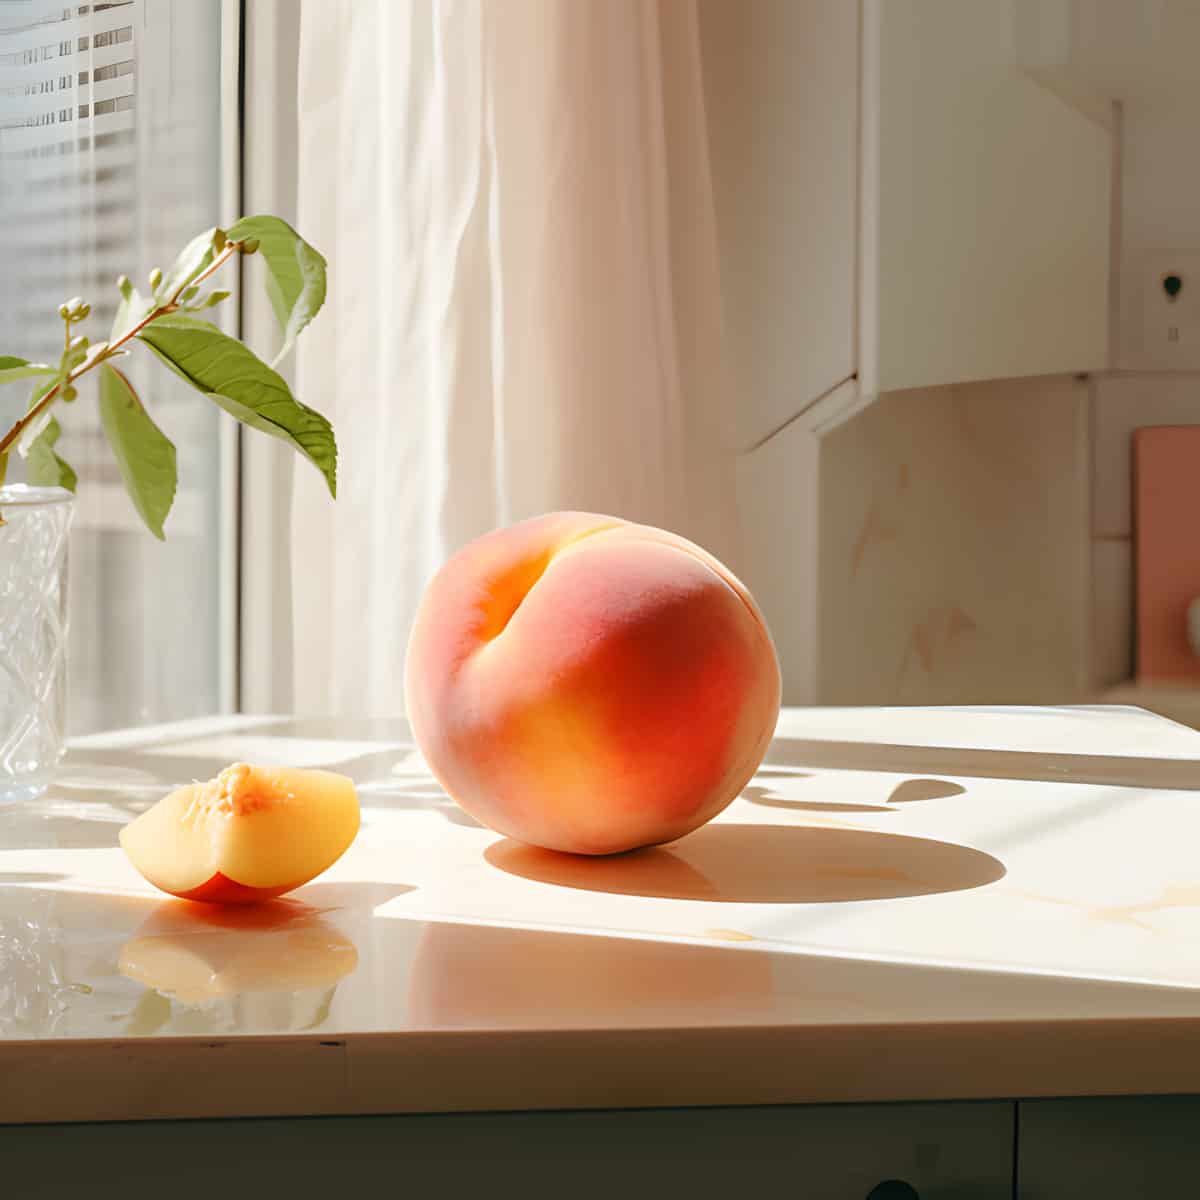 Peach on a kitchen counter